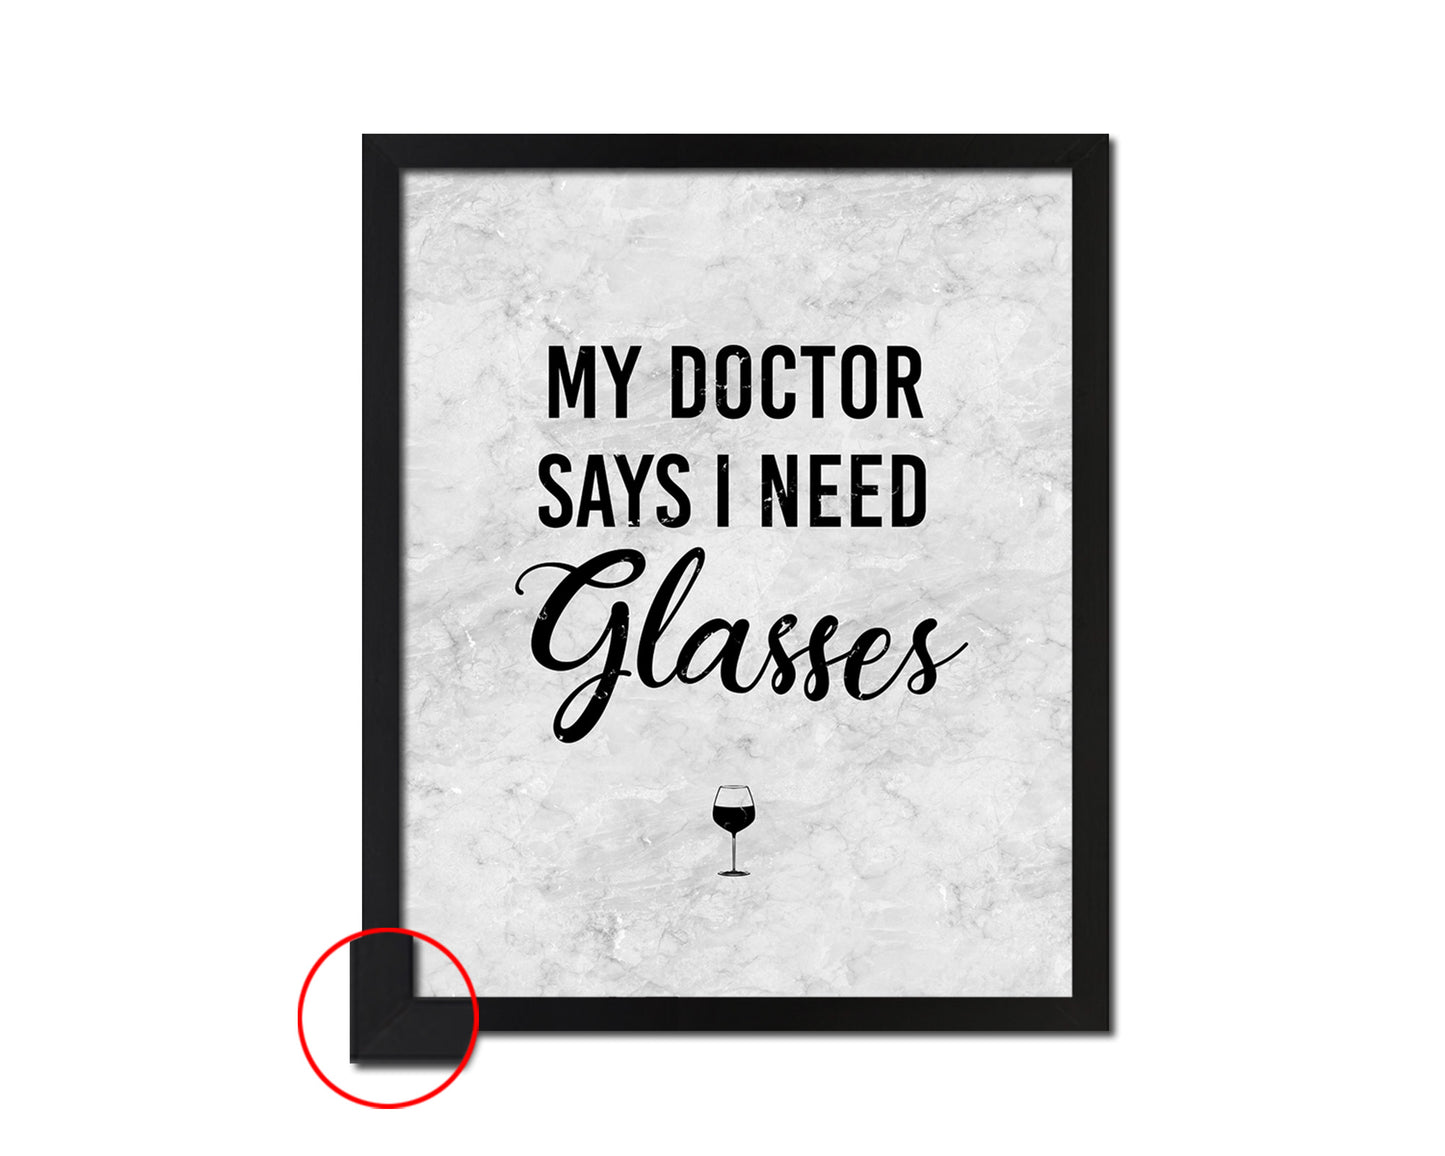 My doctor says I need glasses Quote Framed Print Wall Art Decor Gifts